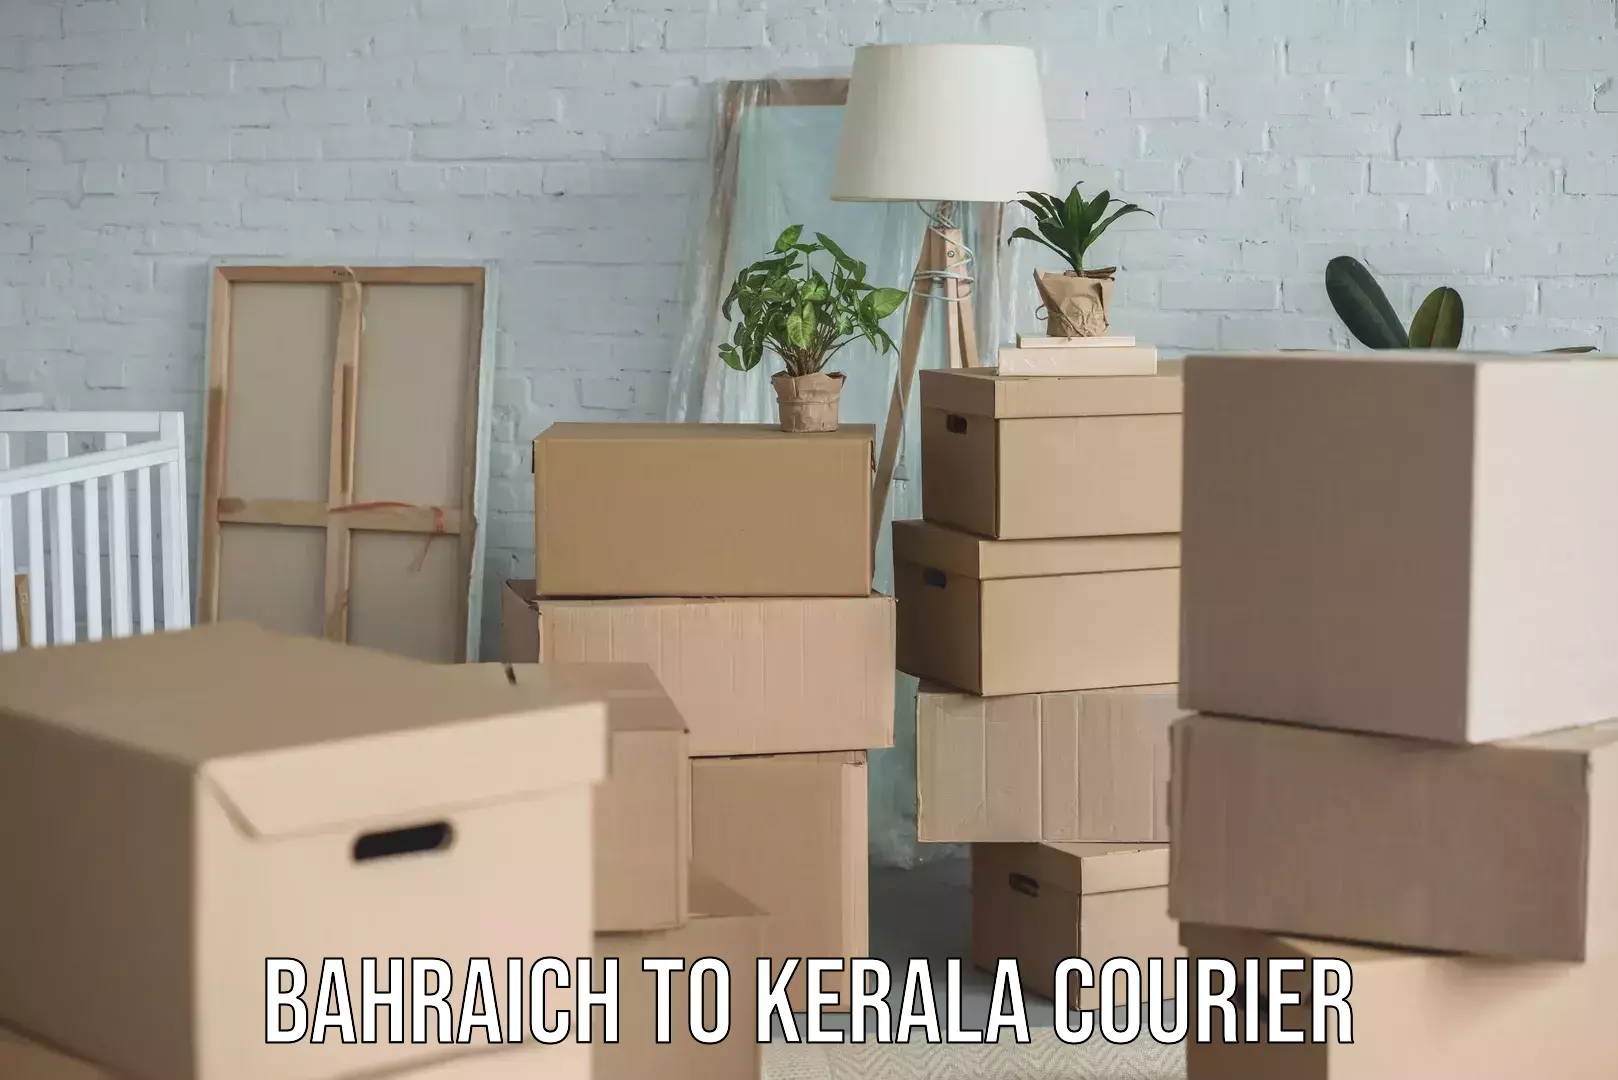 On-call courier service Bahraich to Kerala